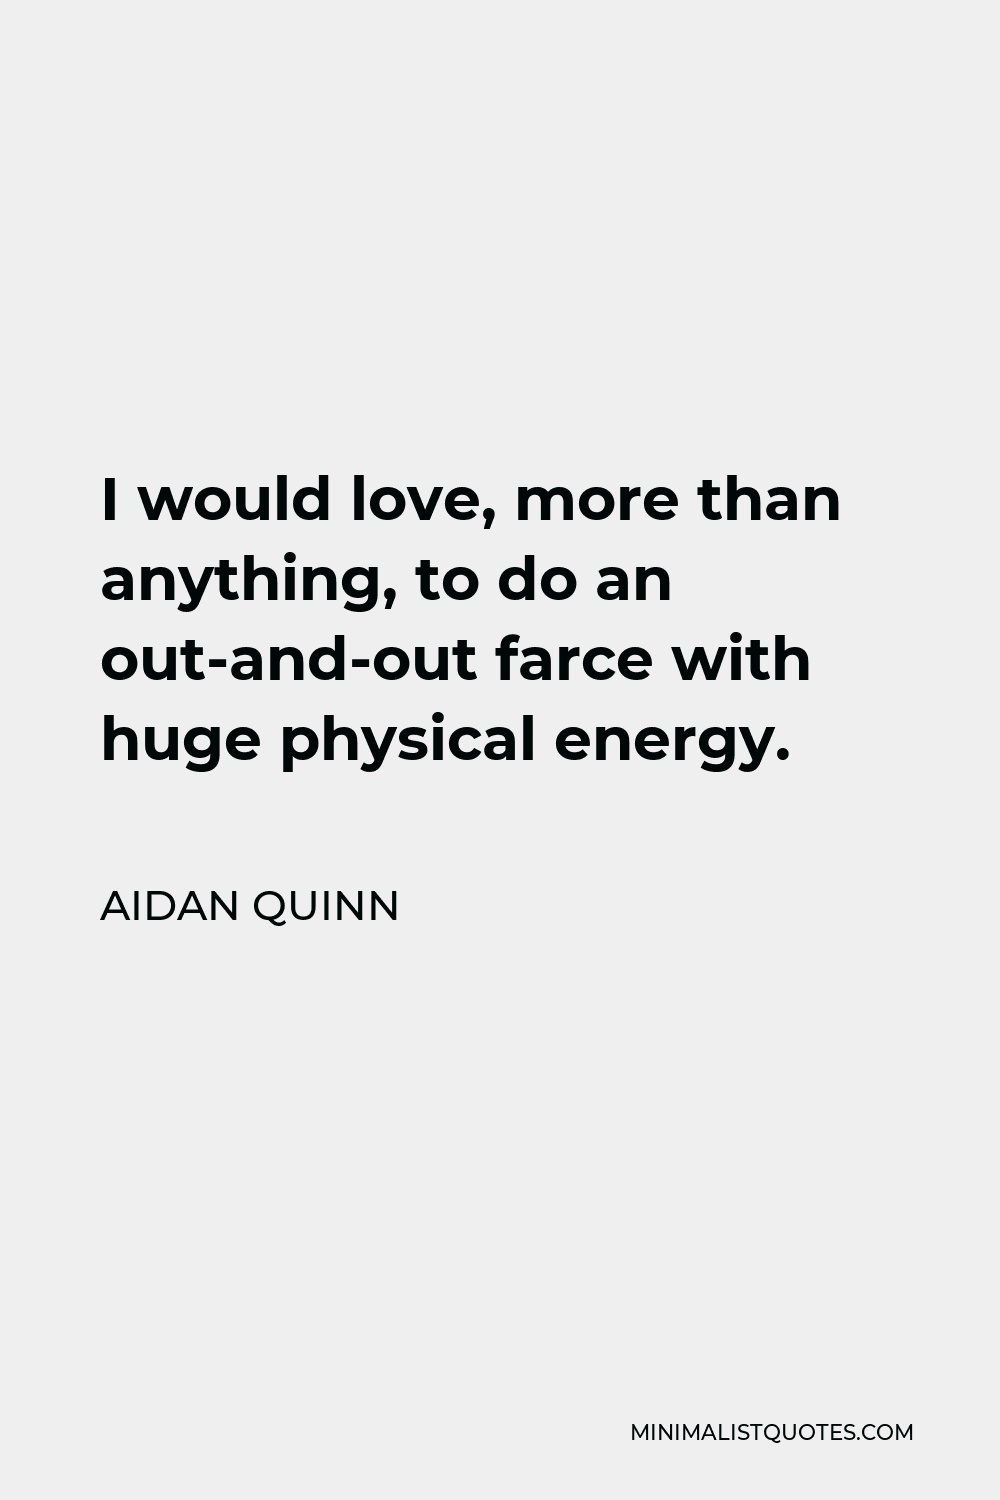 Aidan Quinn Quote - I would love, more than anything, to do an out-and-out farce with huge physical energy.